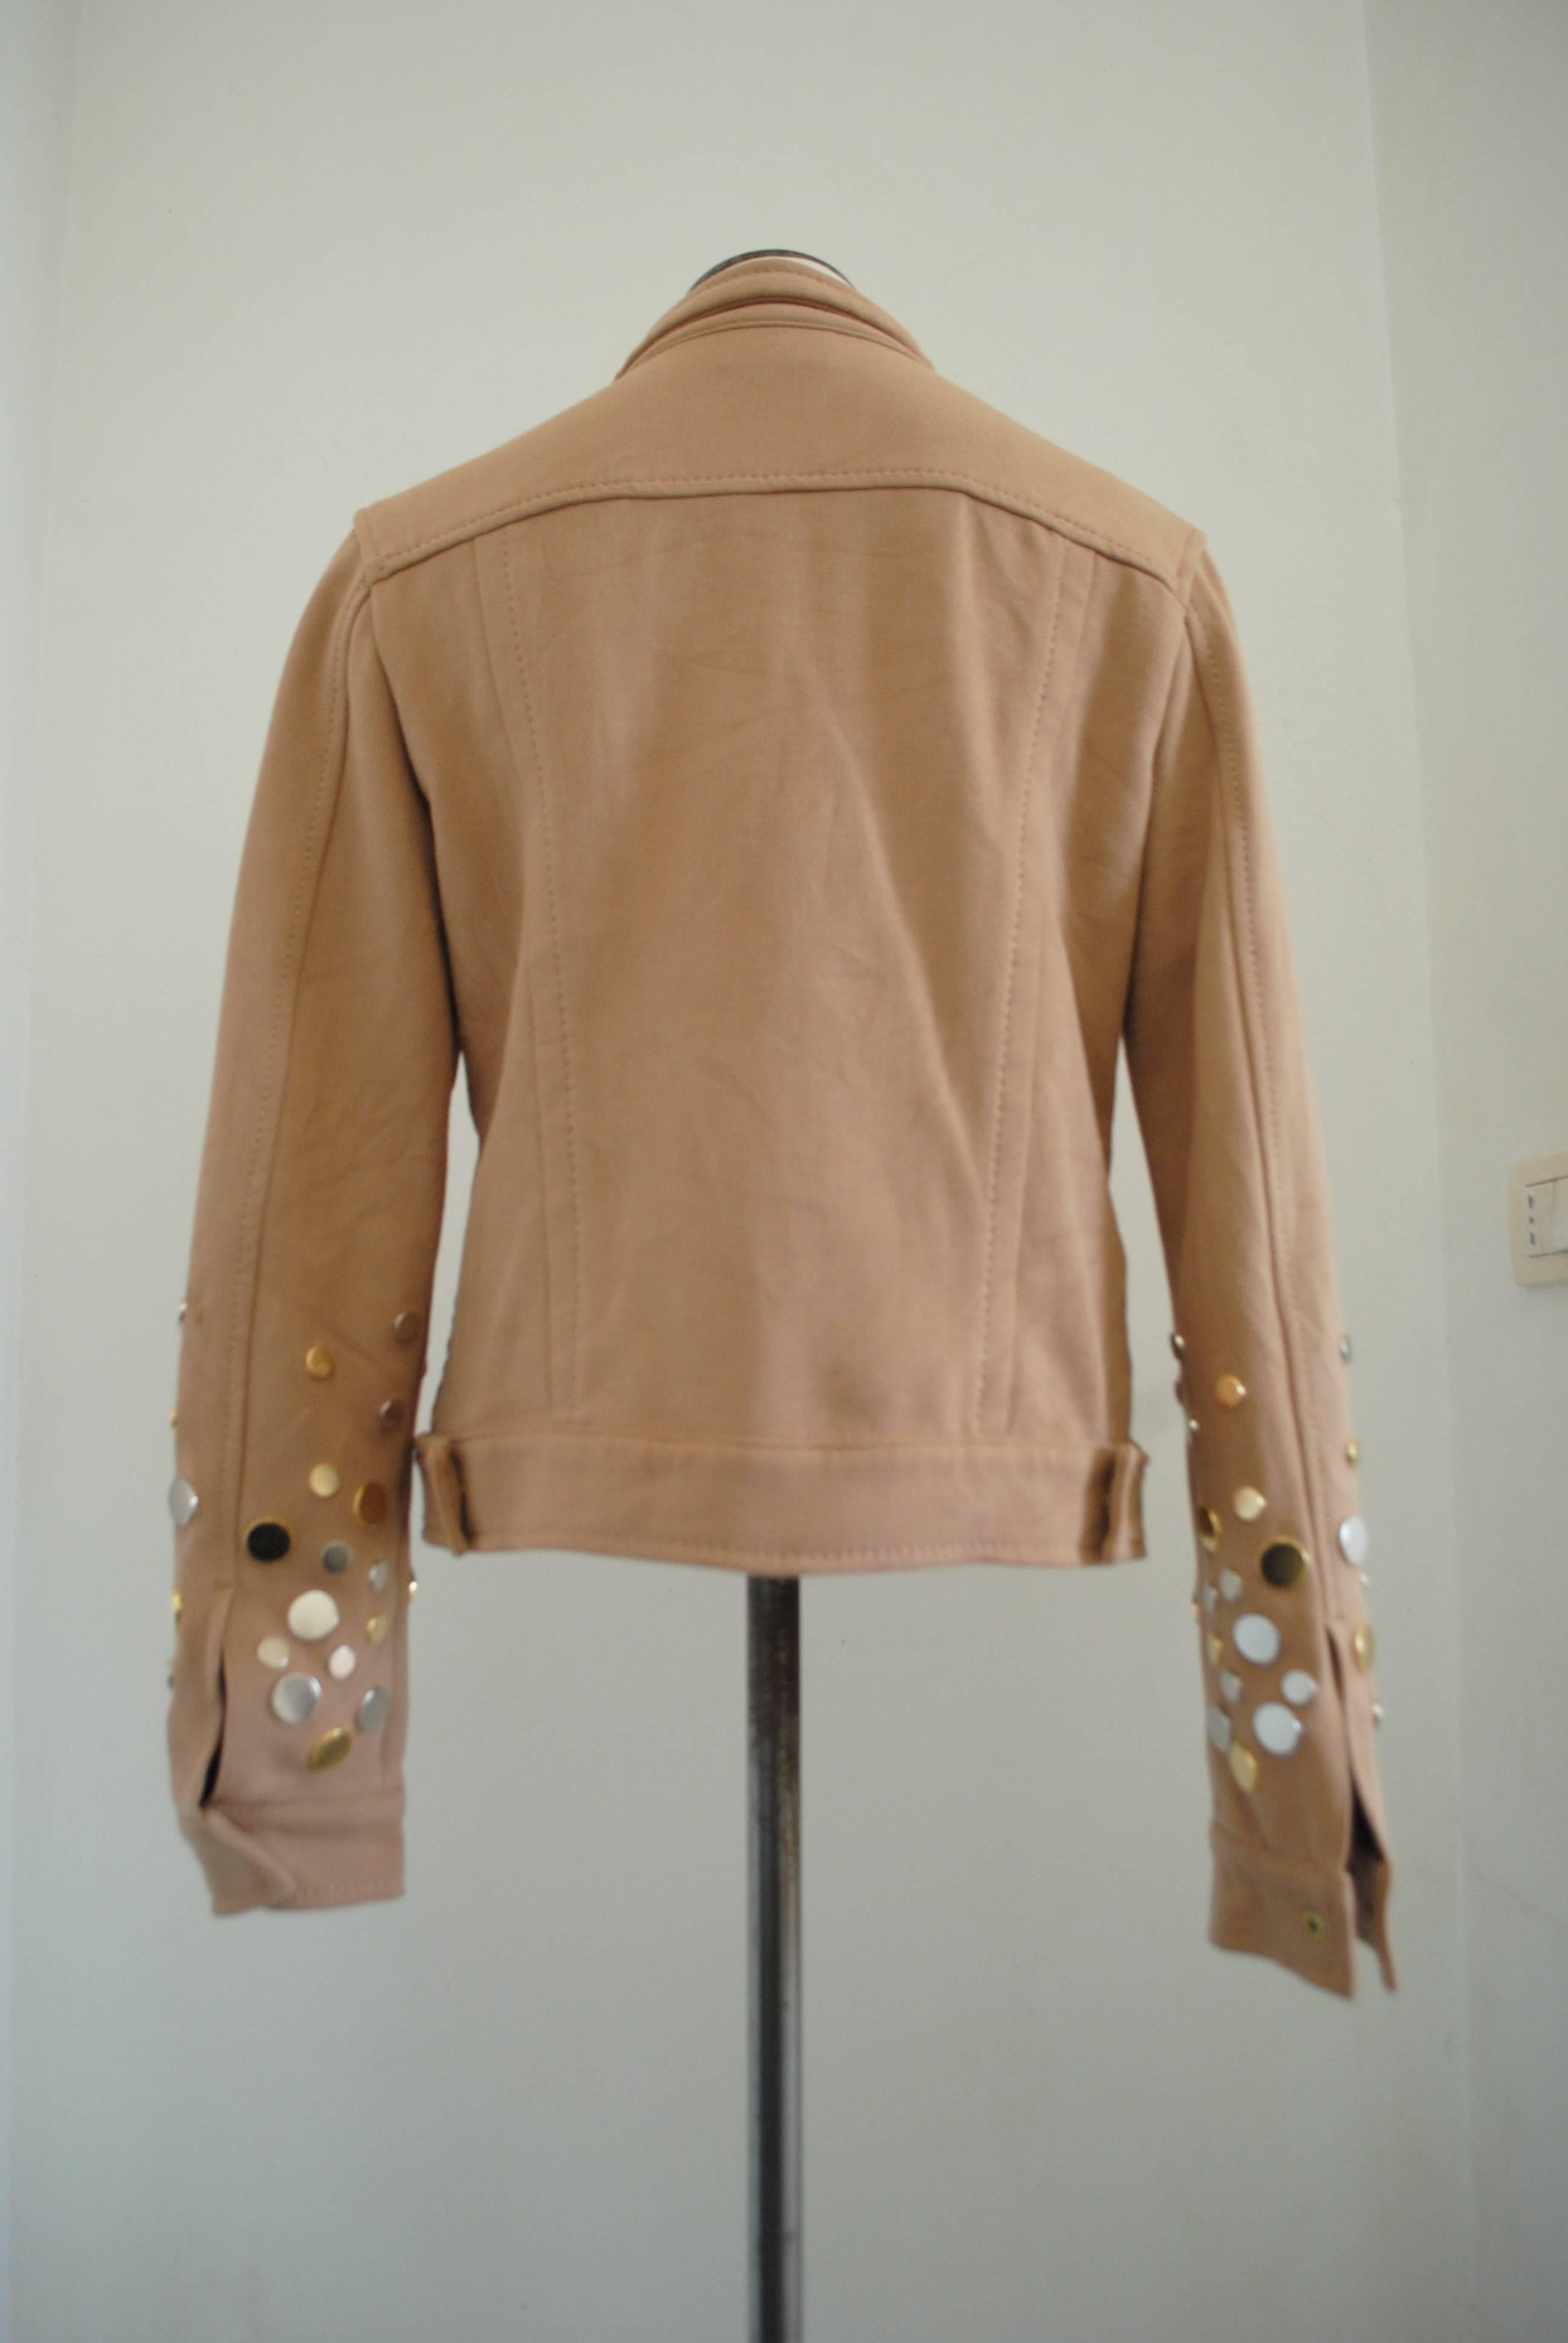 Fendi jacket with studs In Excellent Condition For Sale In Capri, IT